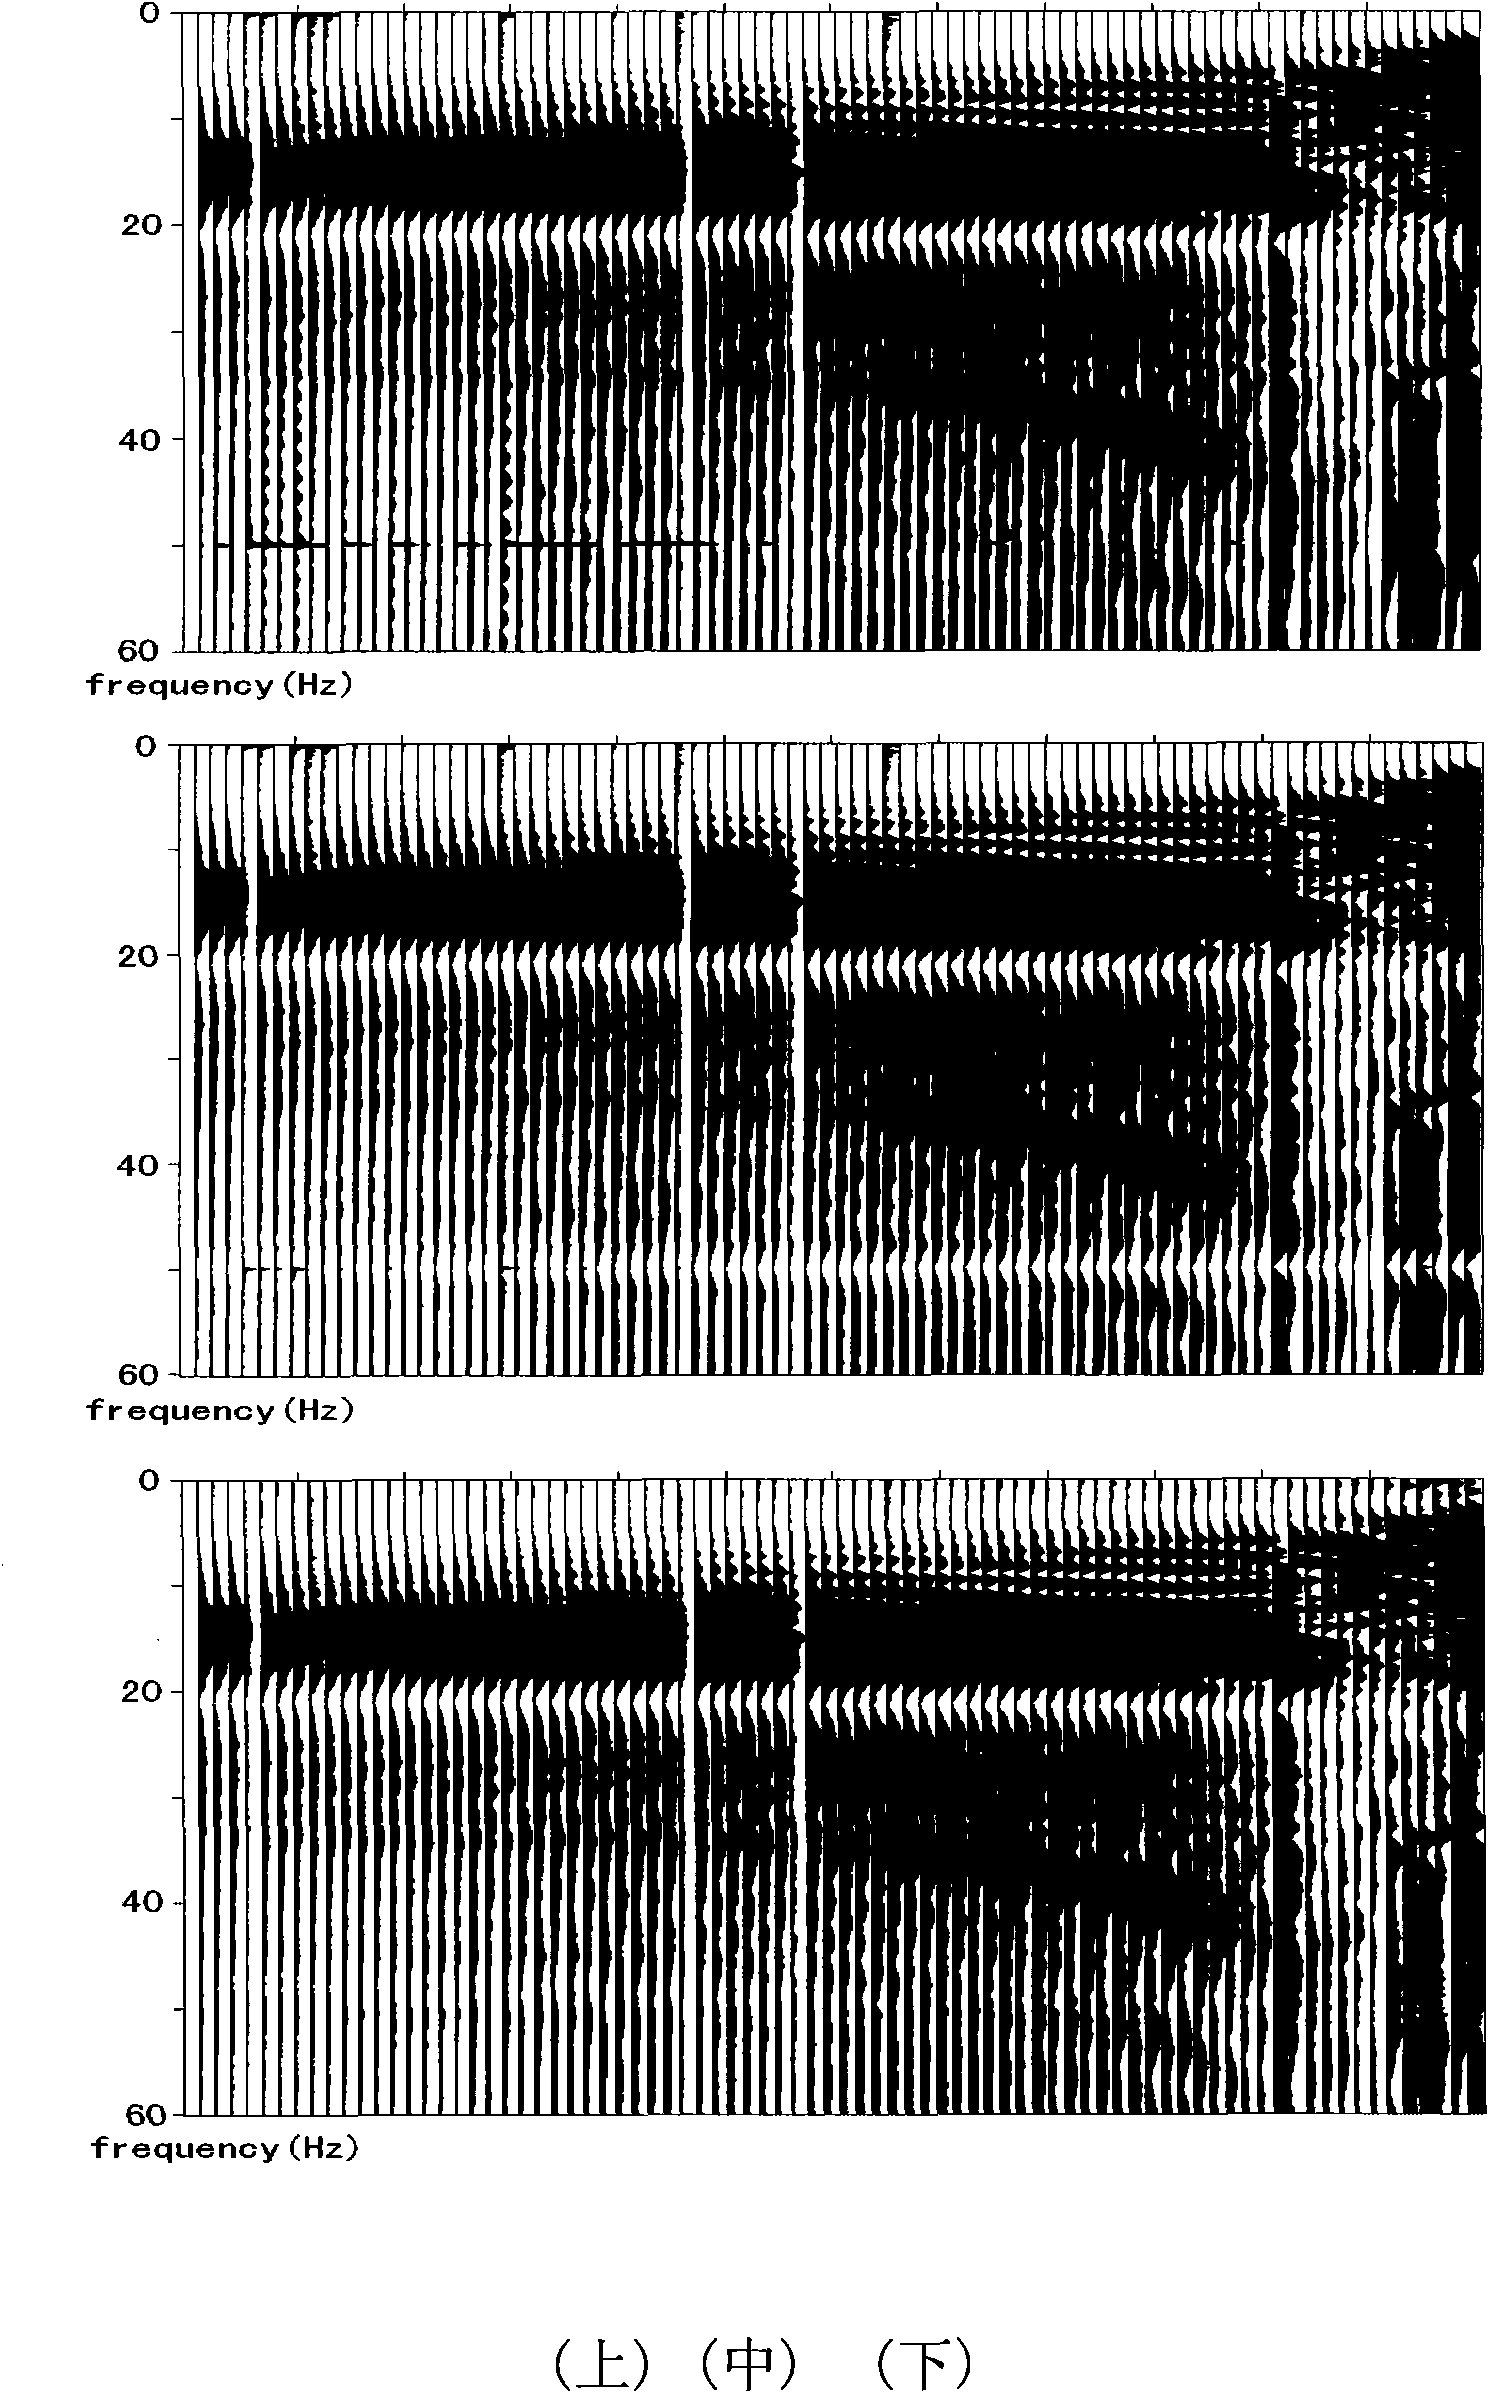 Automatic identification and suppression method of single-frequency interference in seismic records